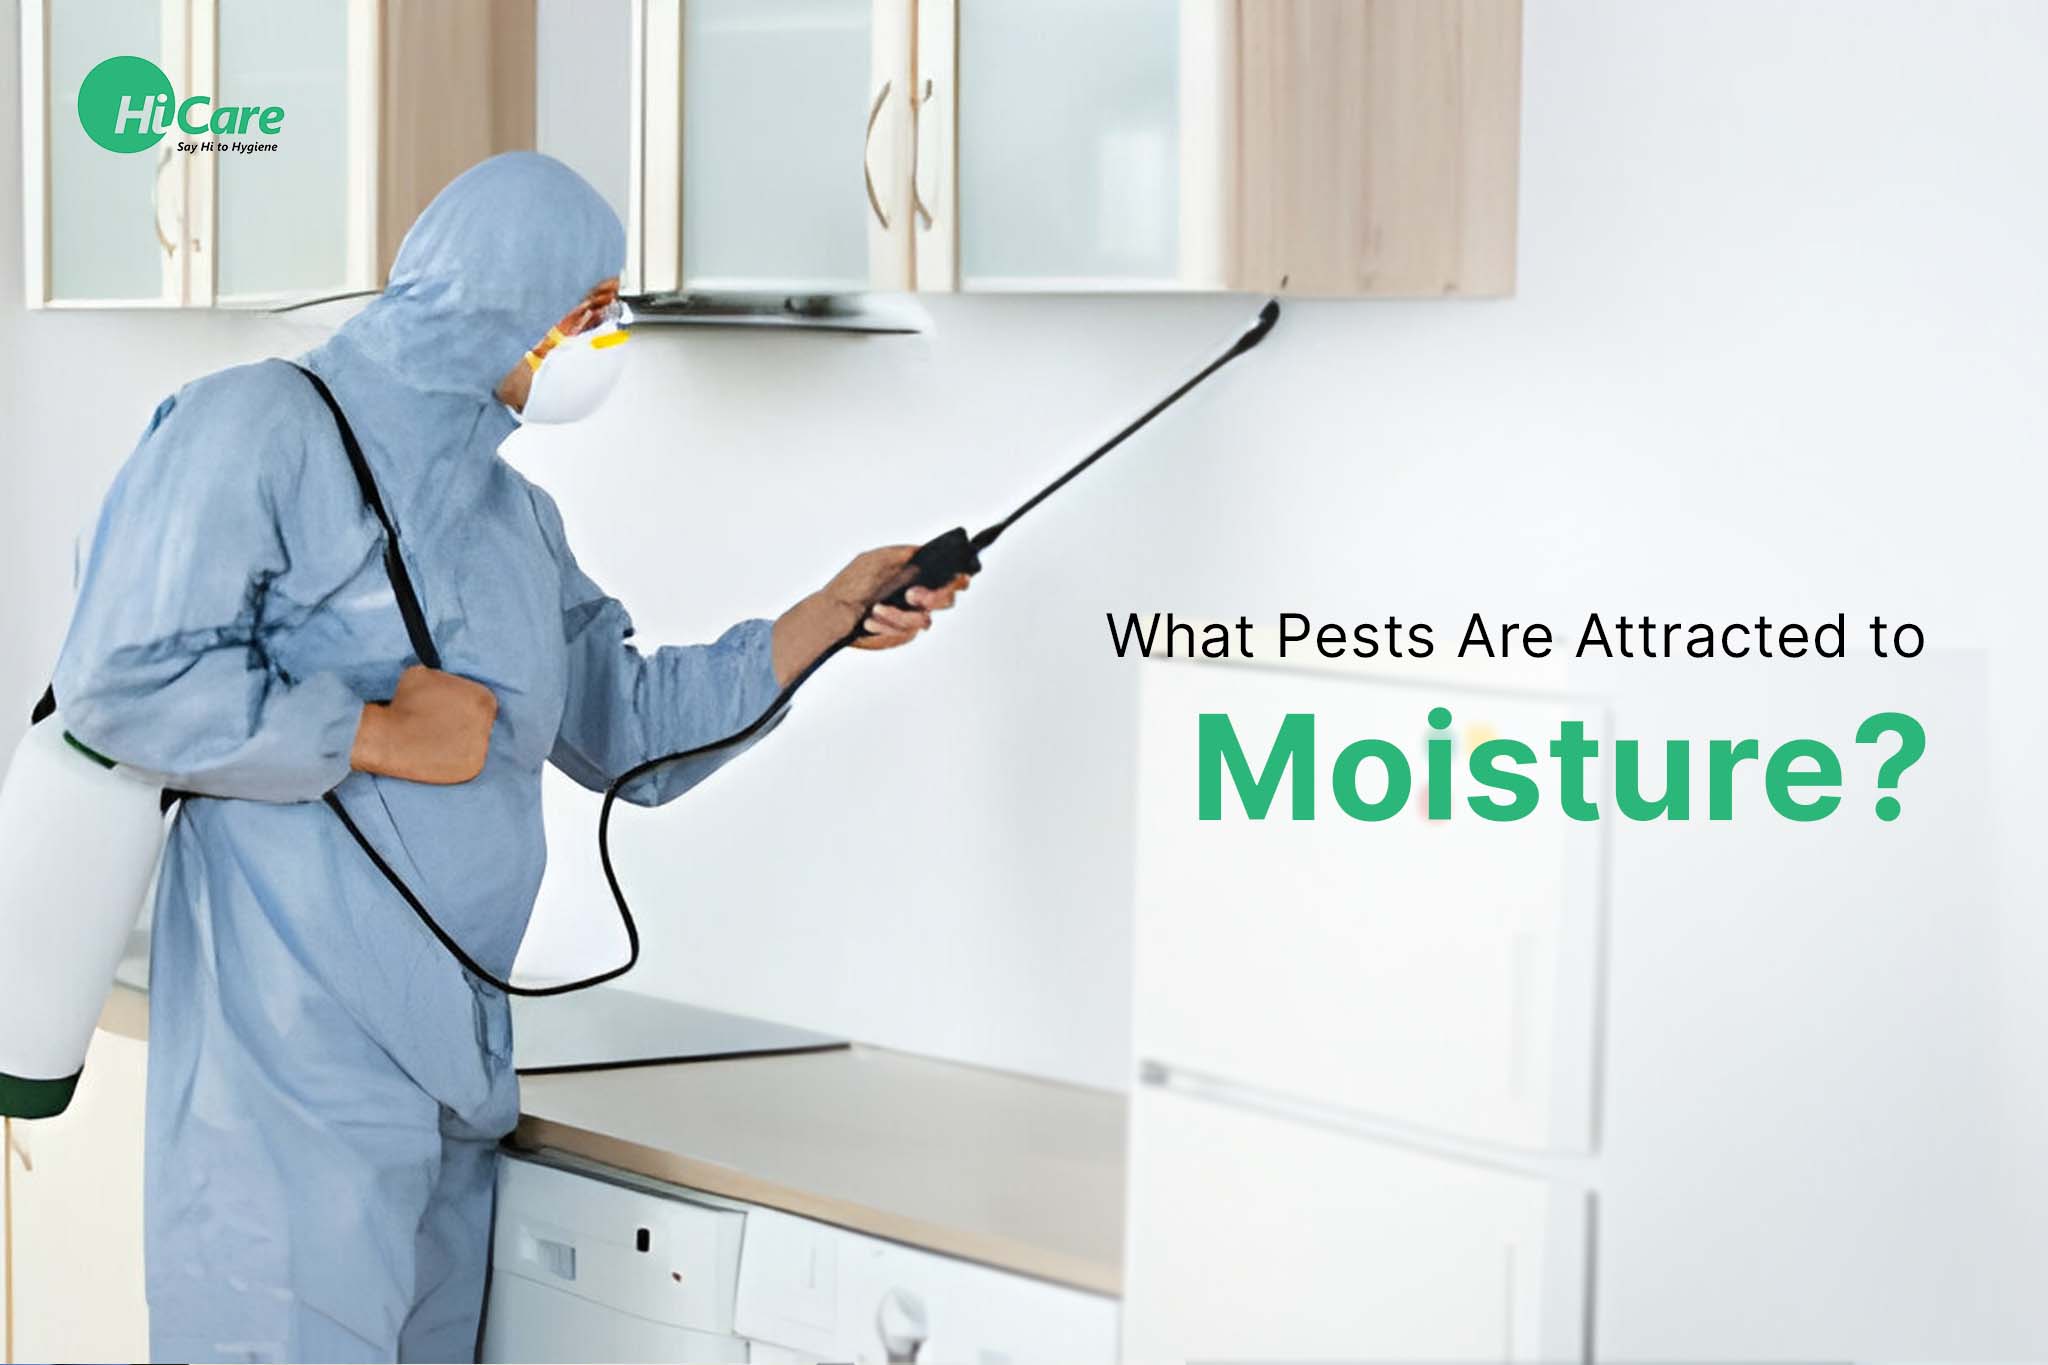 pests that are attracted to moisture